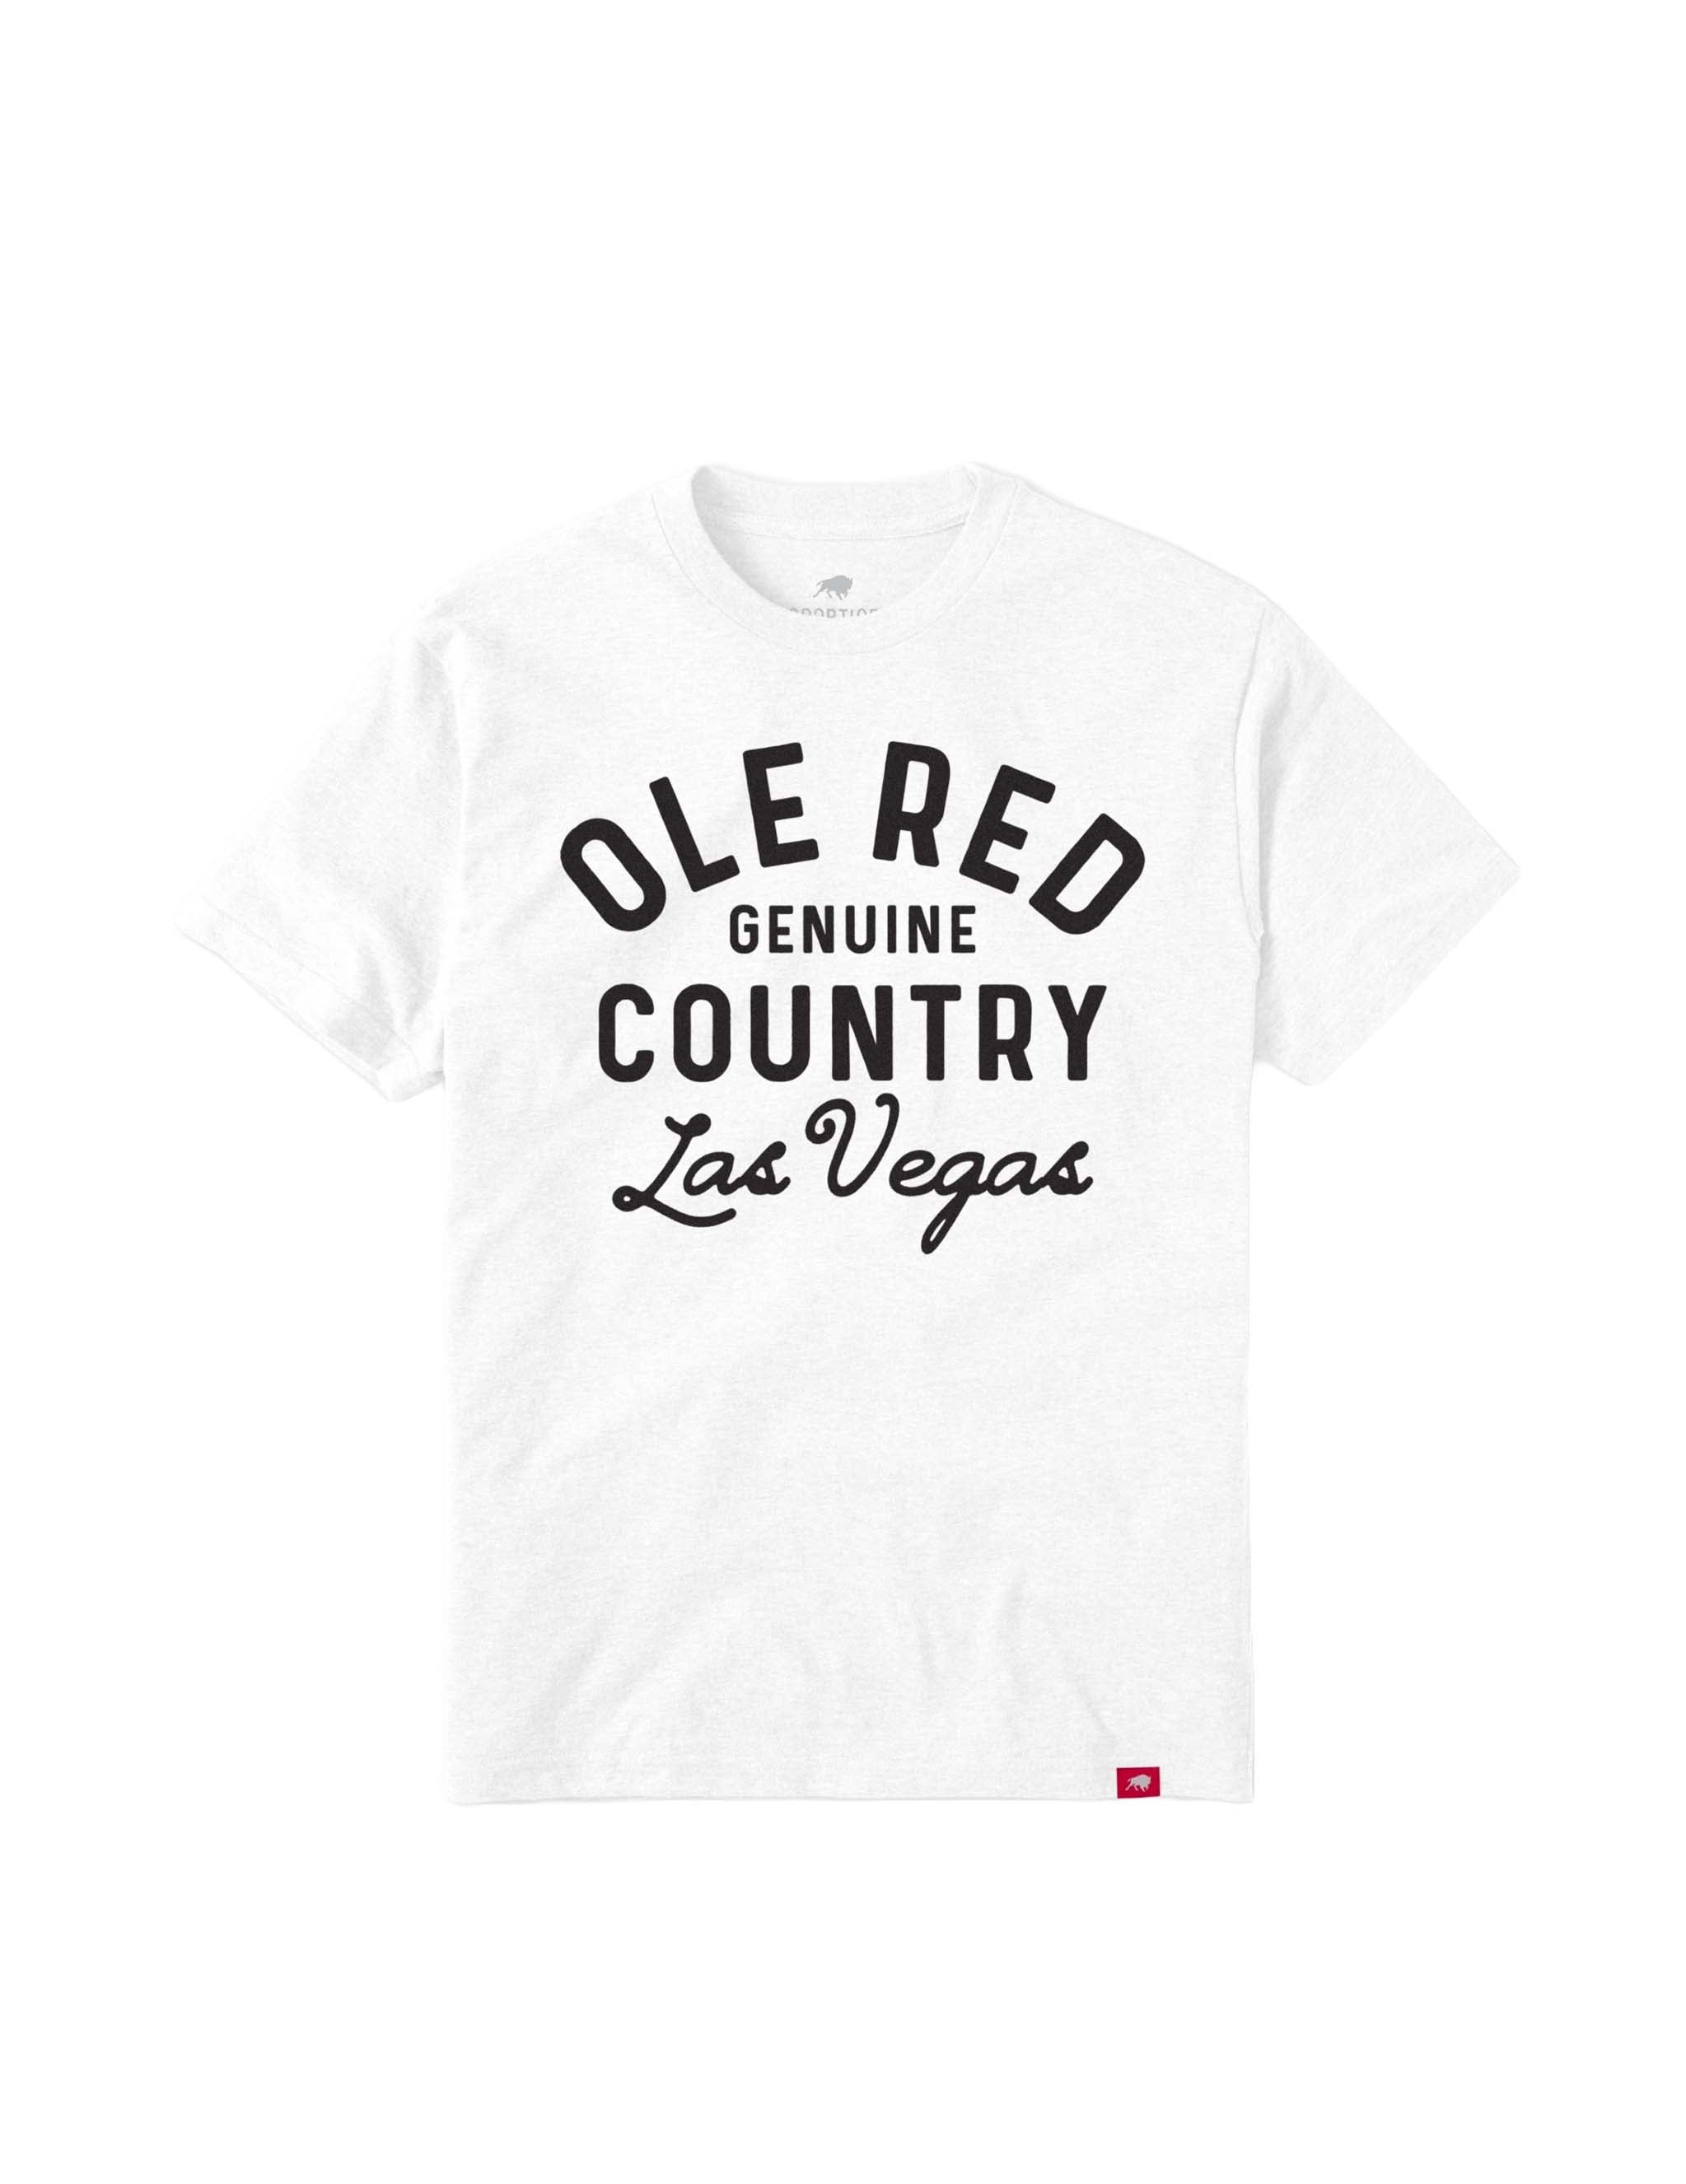 Ole Red Vegas Genuine Country T-Shirt